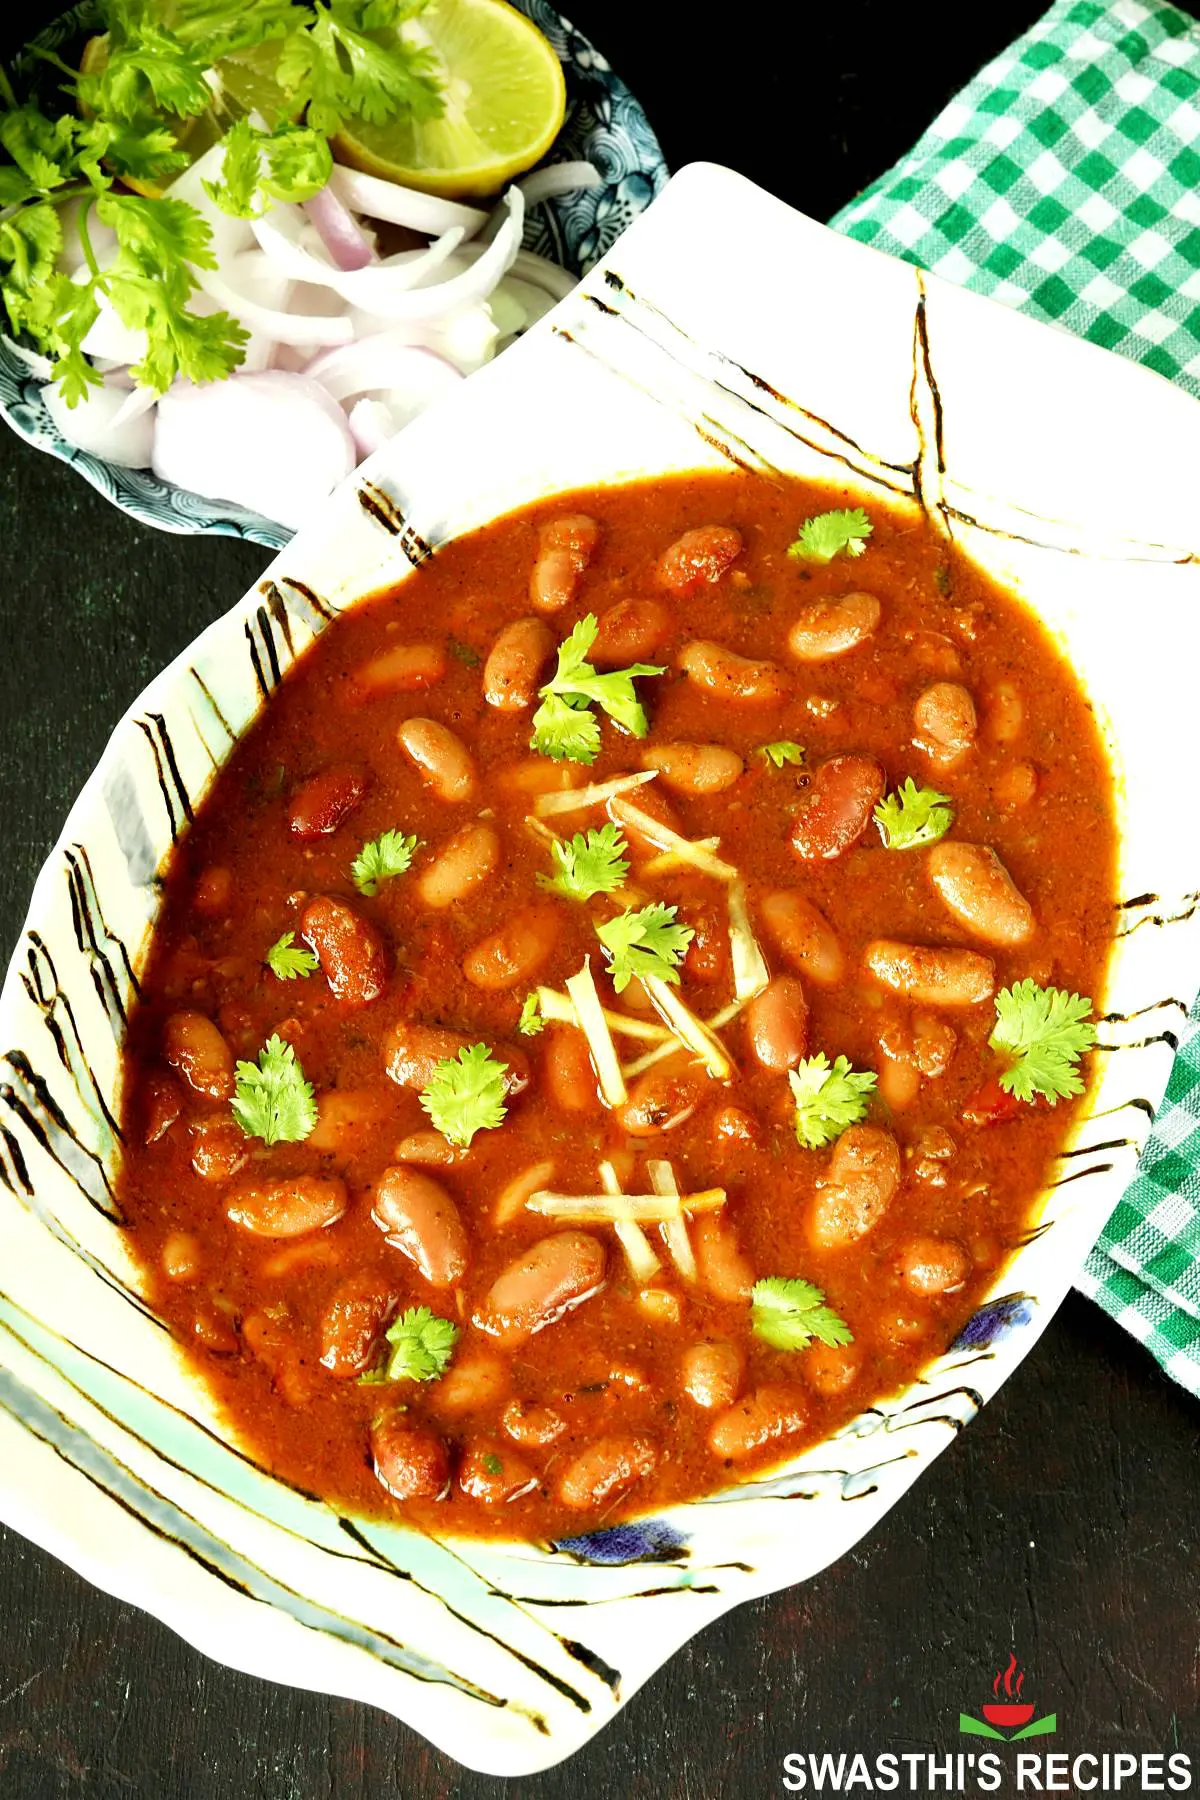 Rajma recipe made with red kidney beans, spices, onions and tomatoes